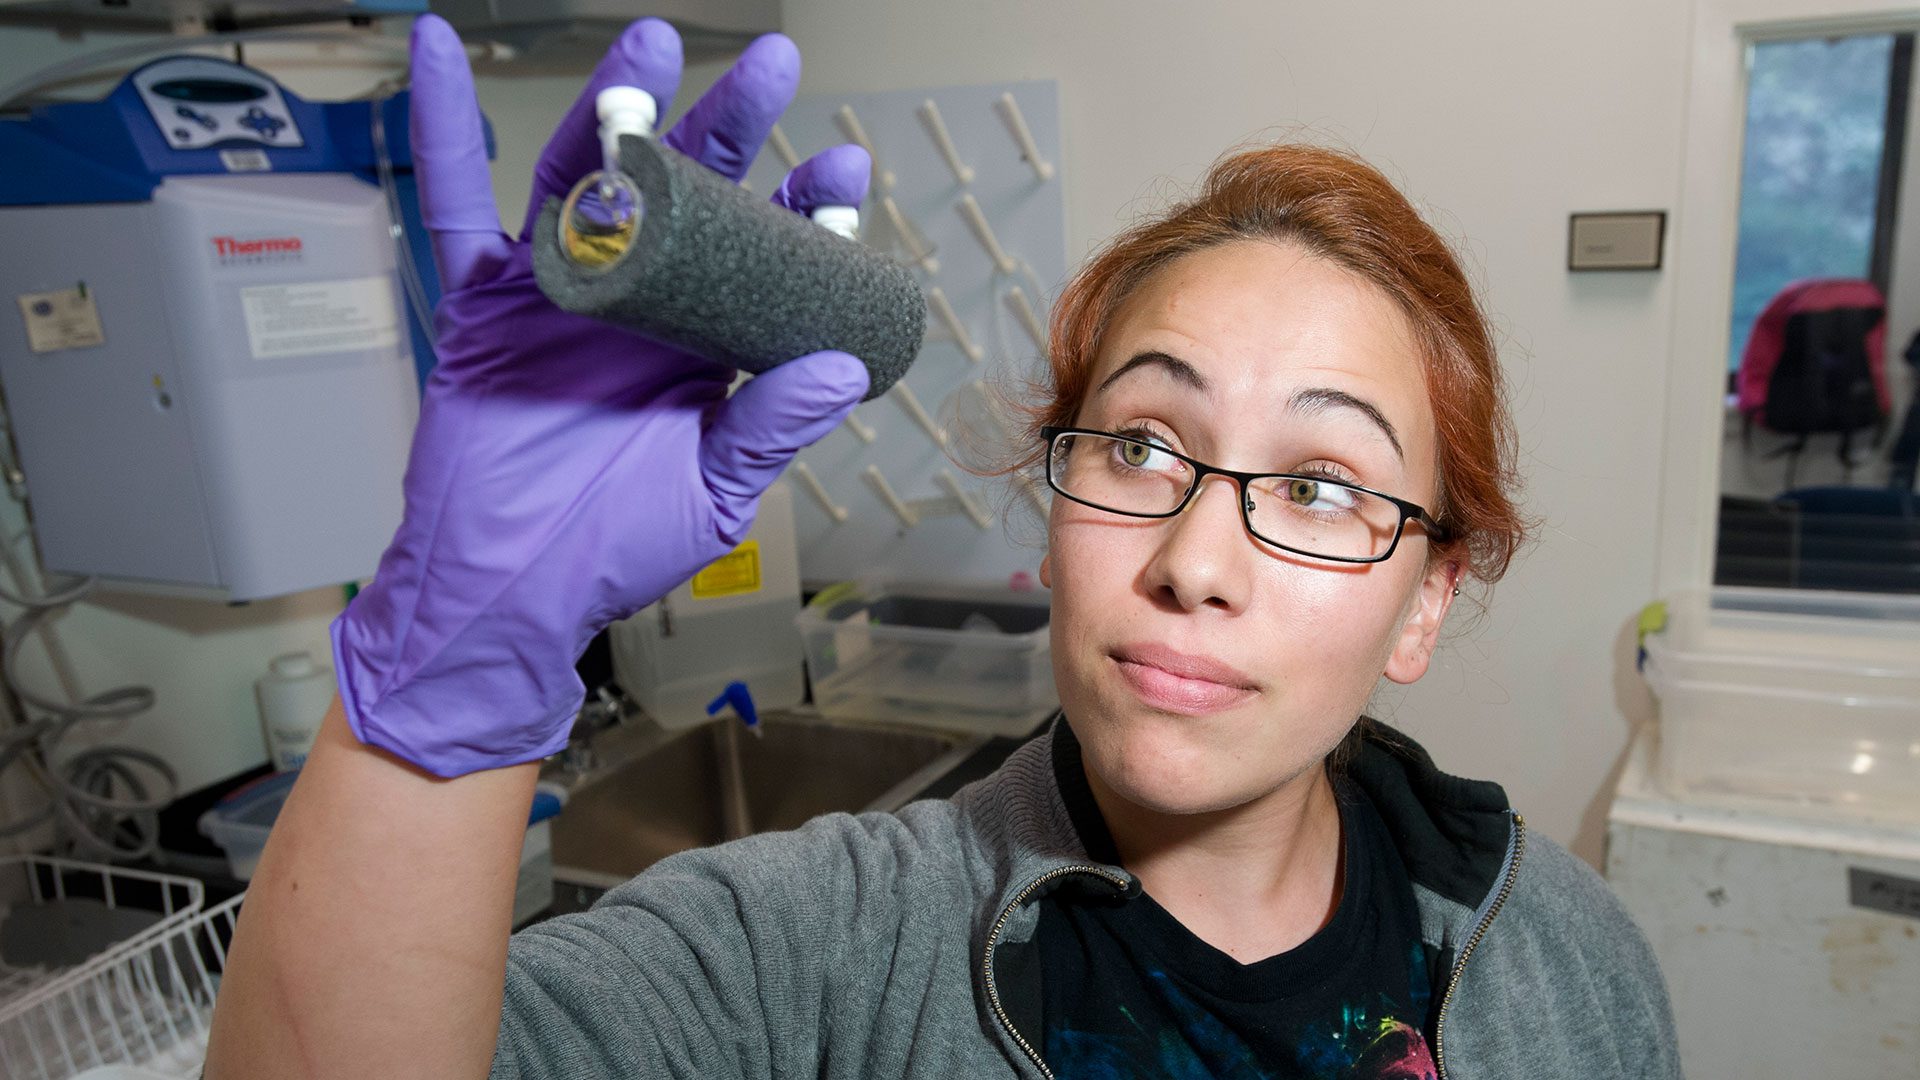 Alterra Sanchez, a 2013 Summer Student Fellow from San Diego State University, readies an optical cell for making pH measurements in a high-precision spectrophotometer. The cell contains a pH indicator and seawater from a local marsh.